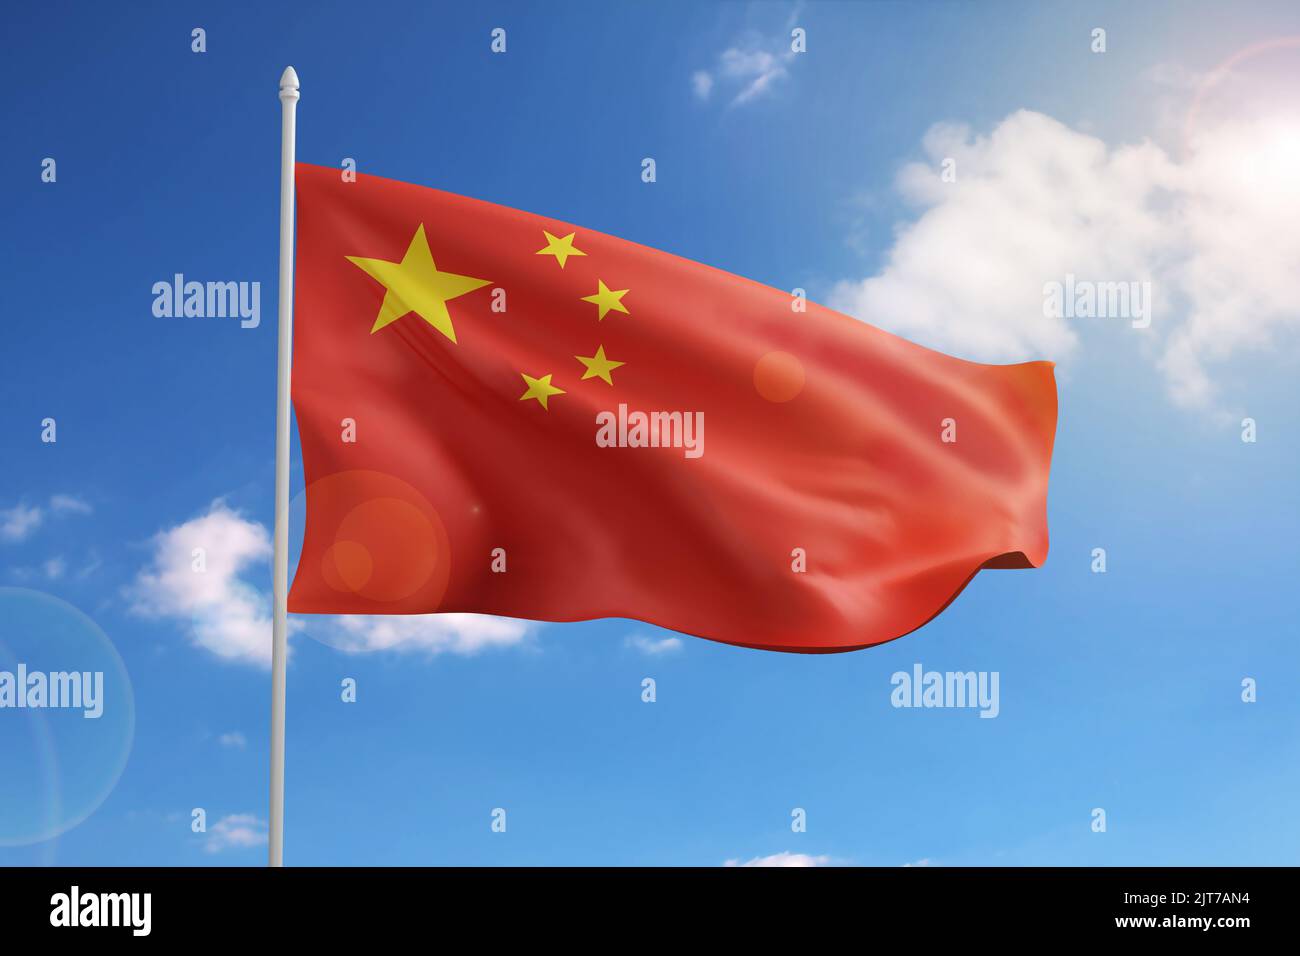 Flag of People's Republic of China on blue sky. 3d illustration. Stock Photo